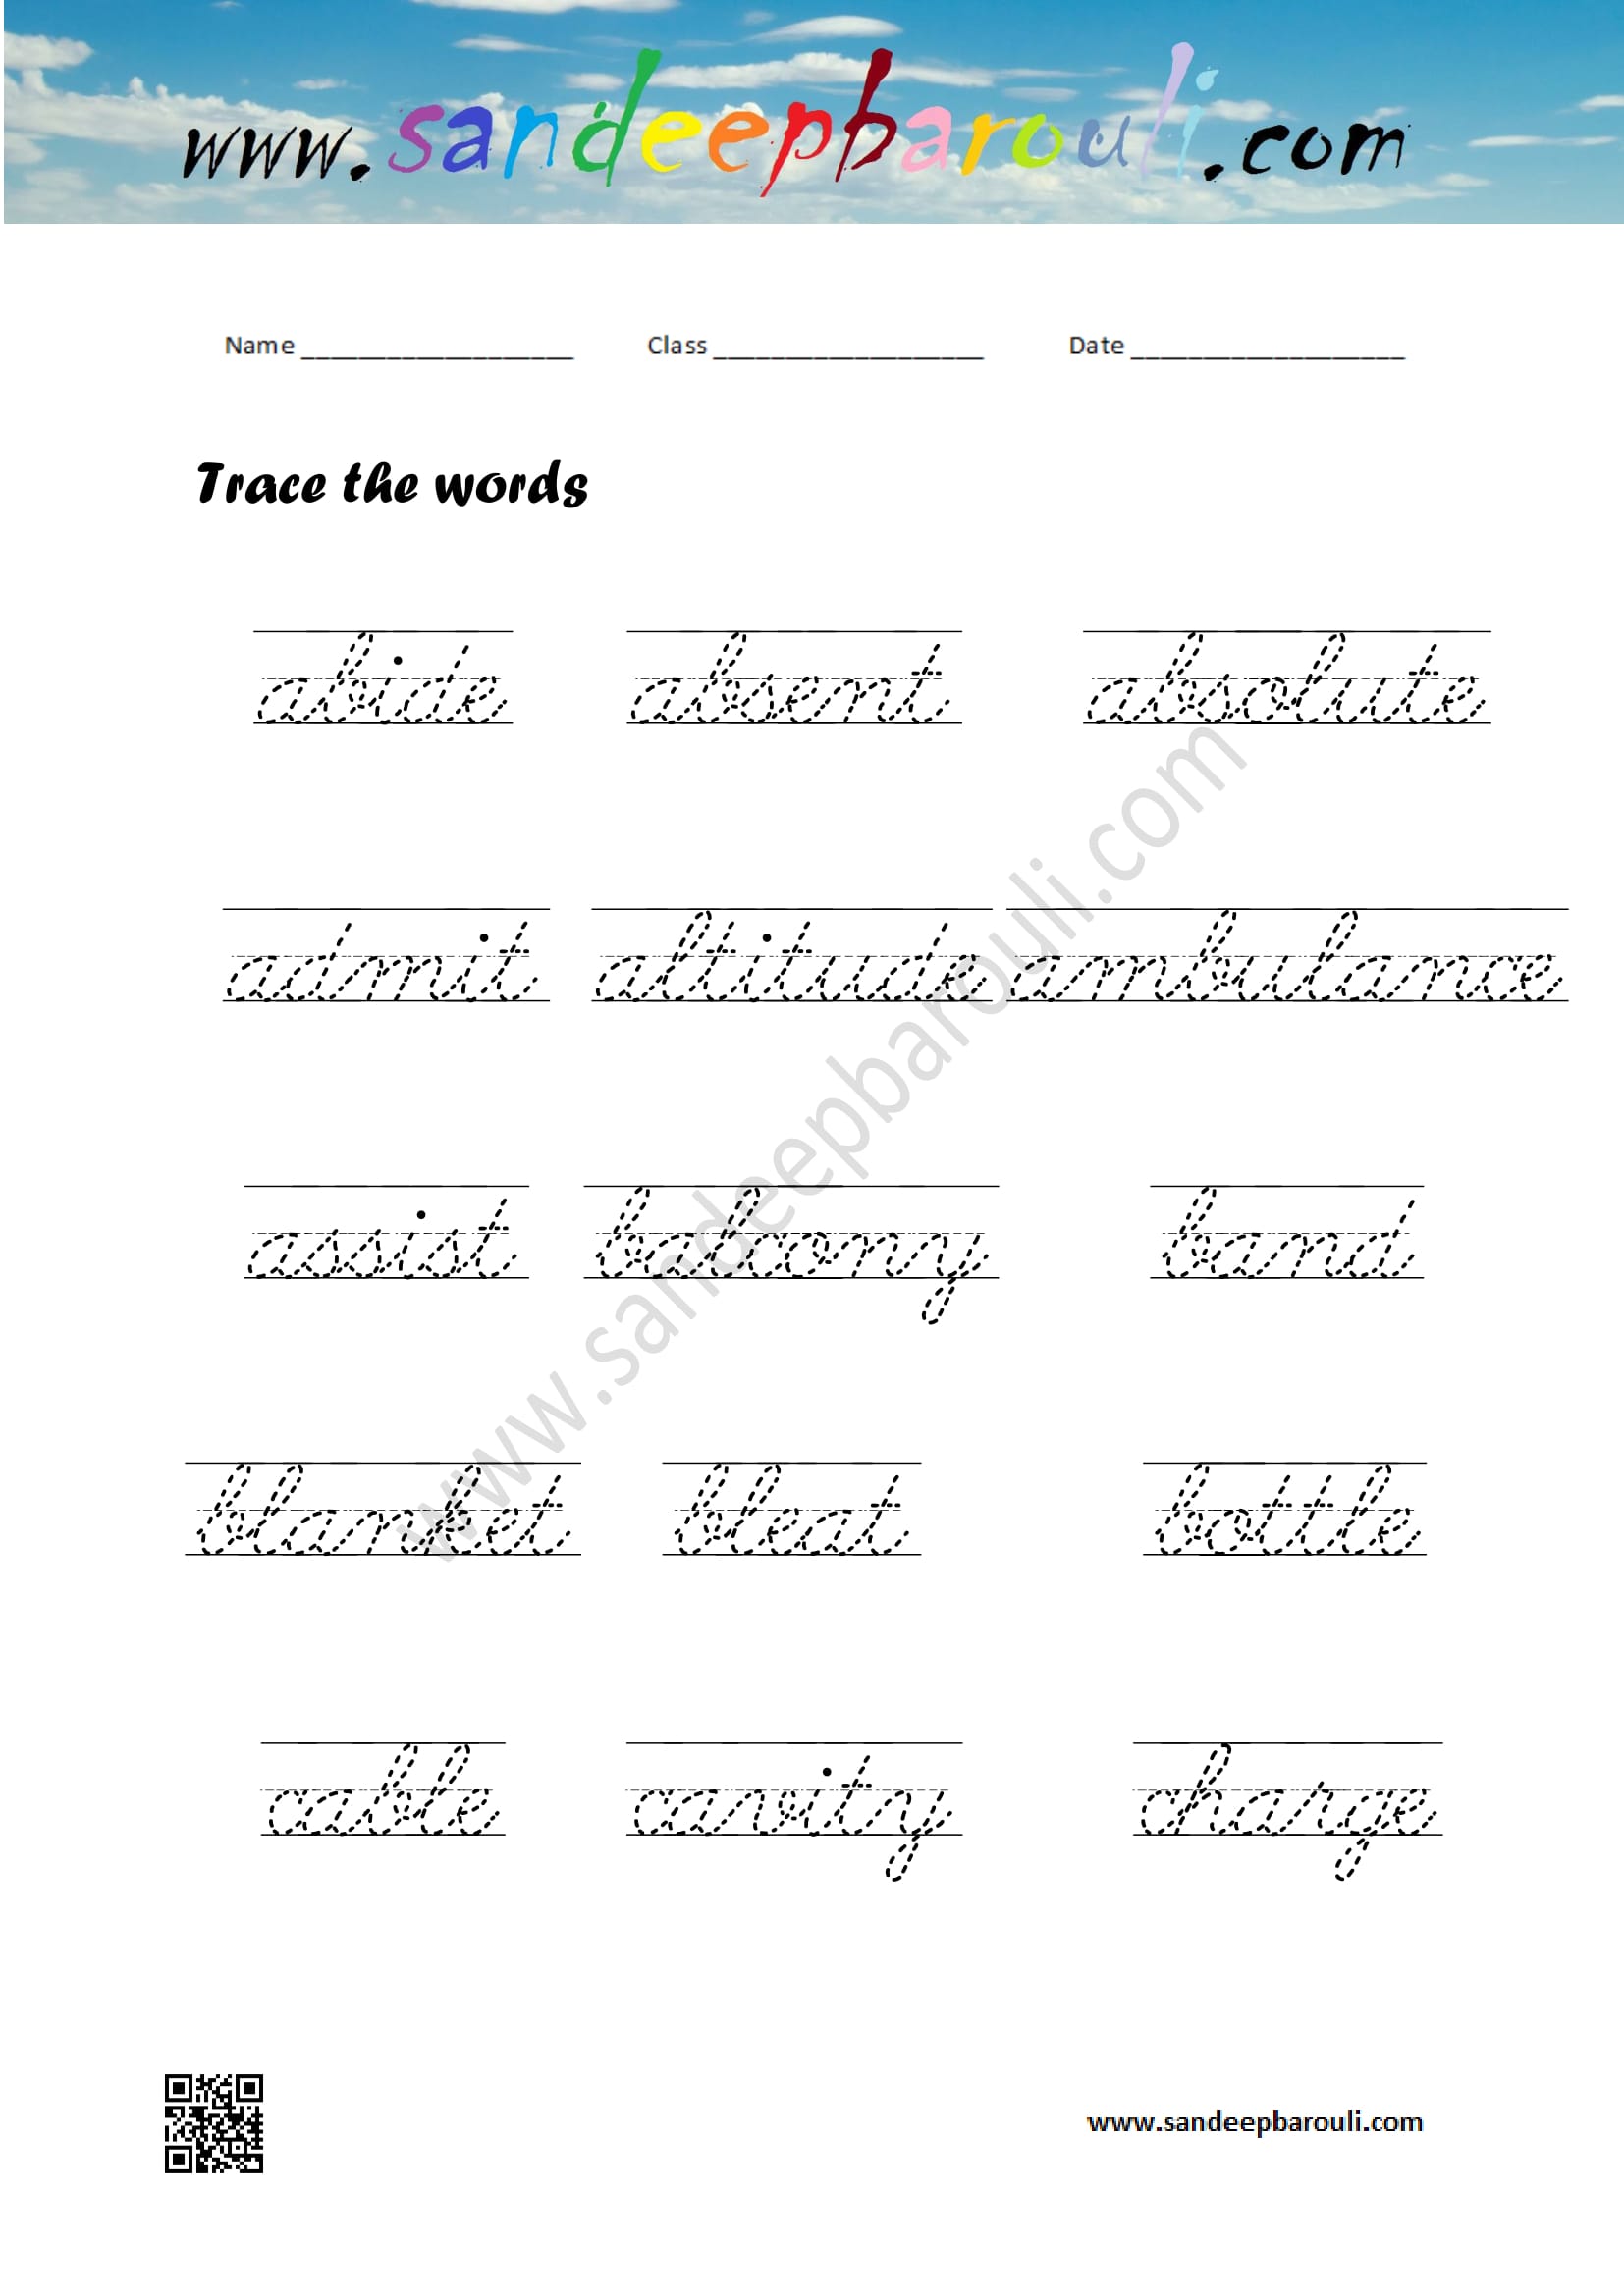 Cursive Writing Worksheet - Trace the words (61 ...